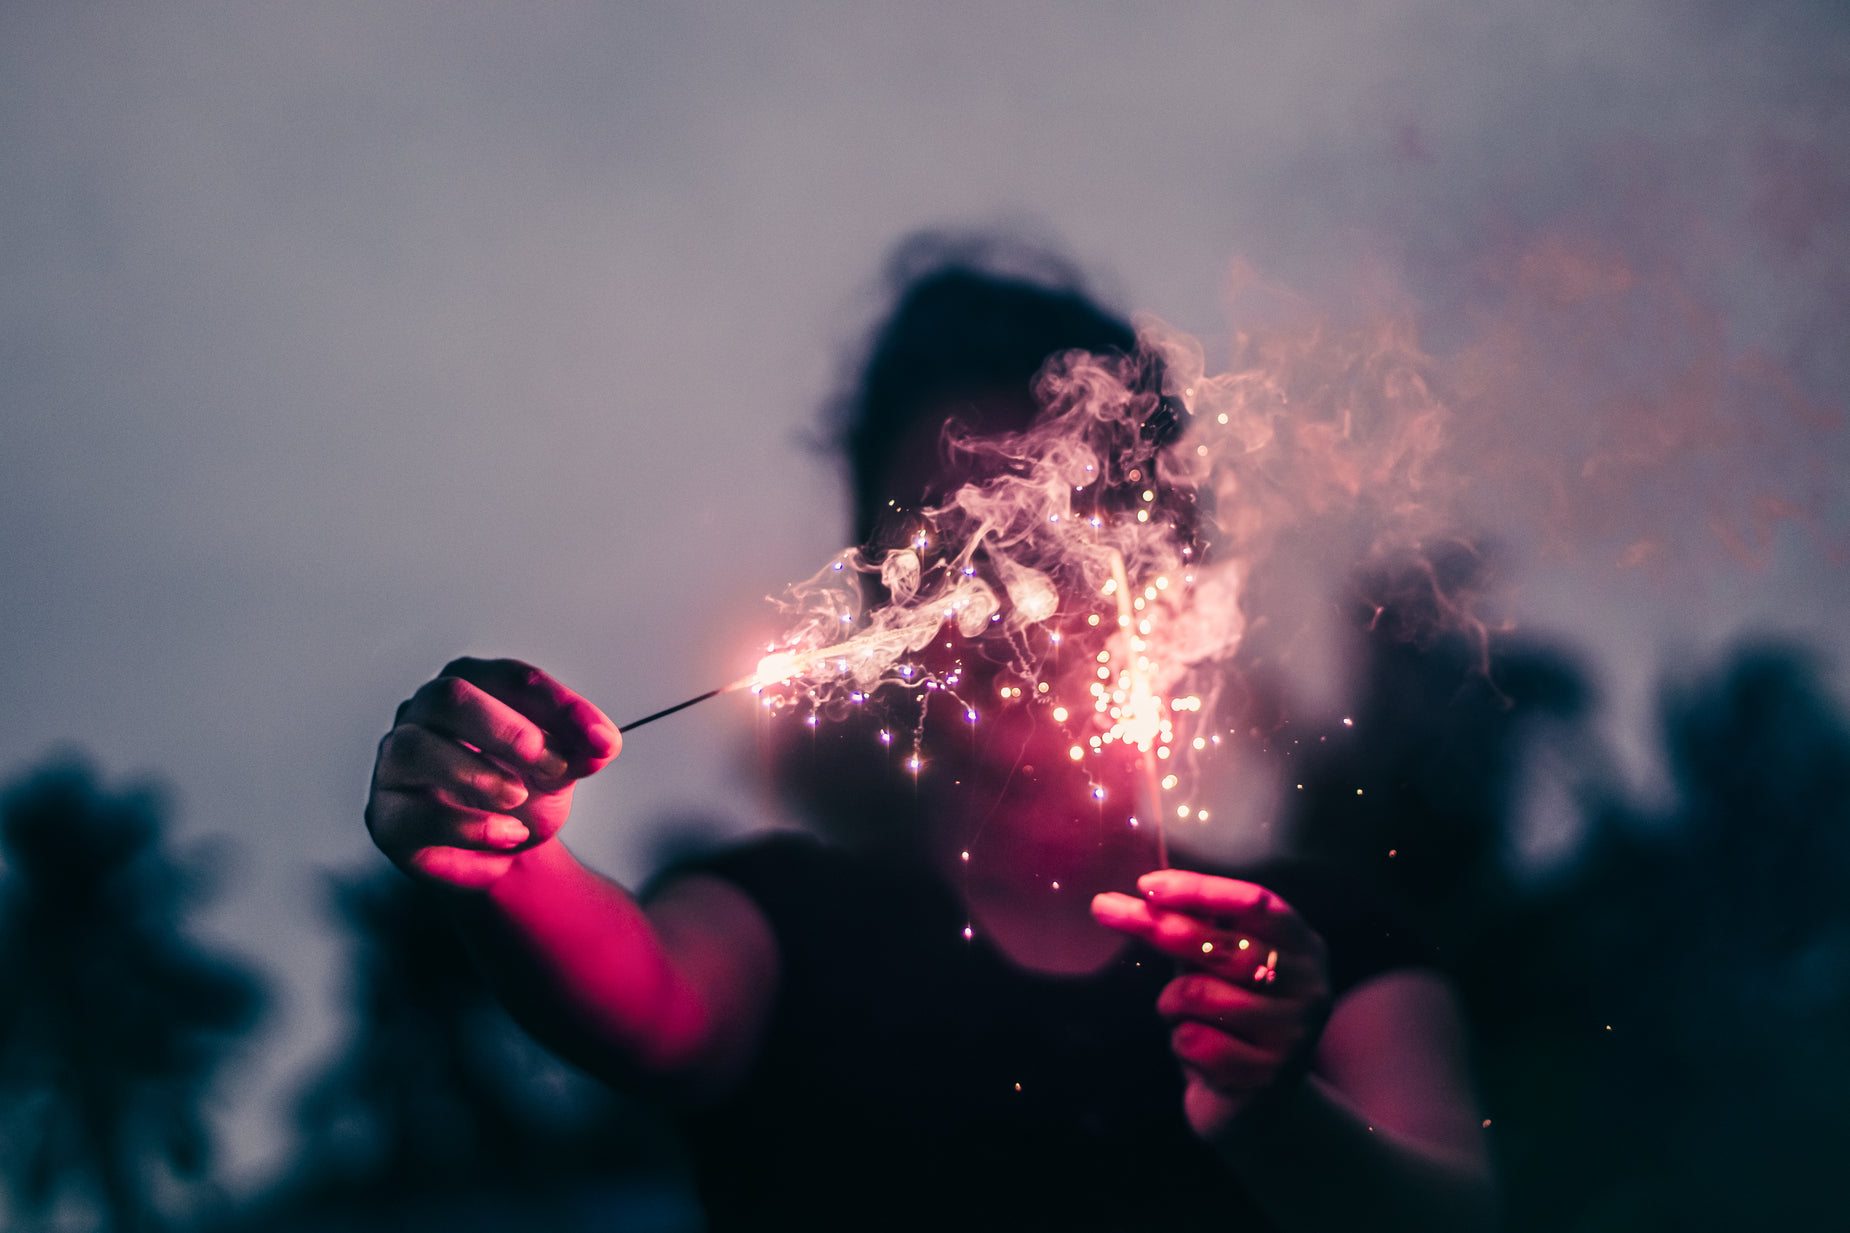 the person is holding a sparkler with their face obscured by smoke